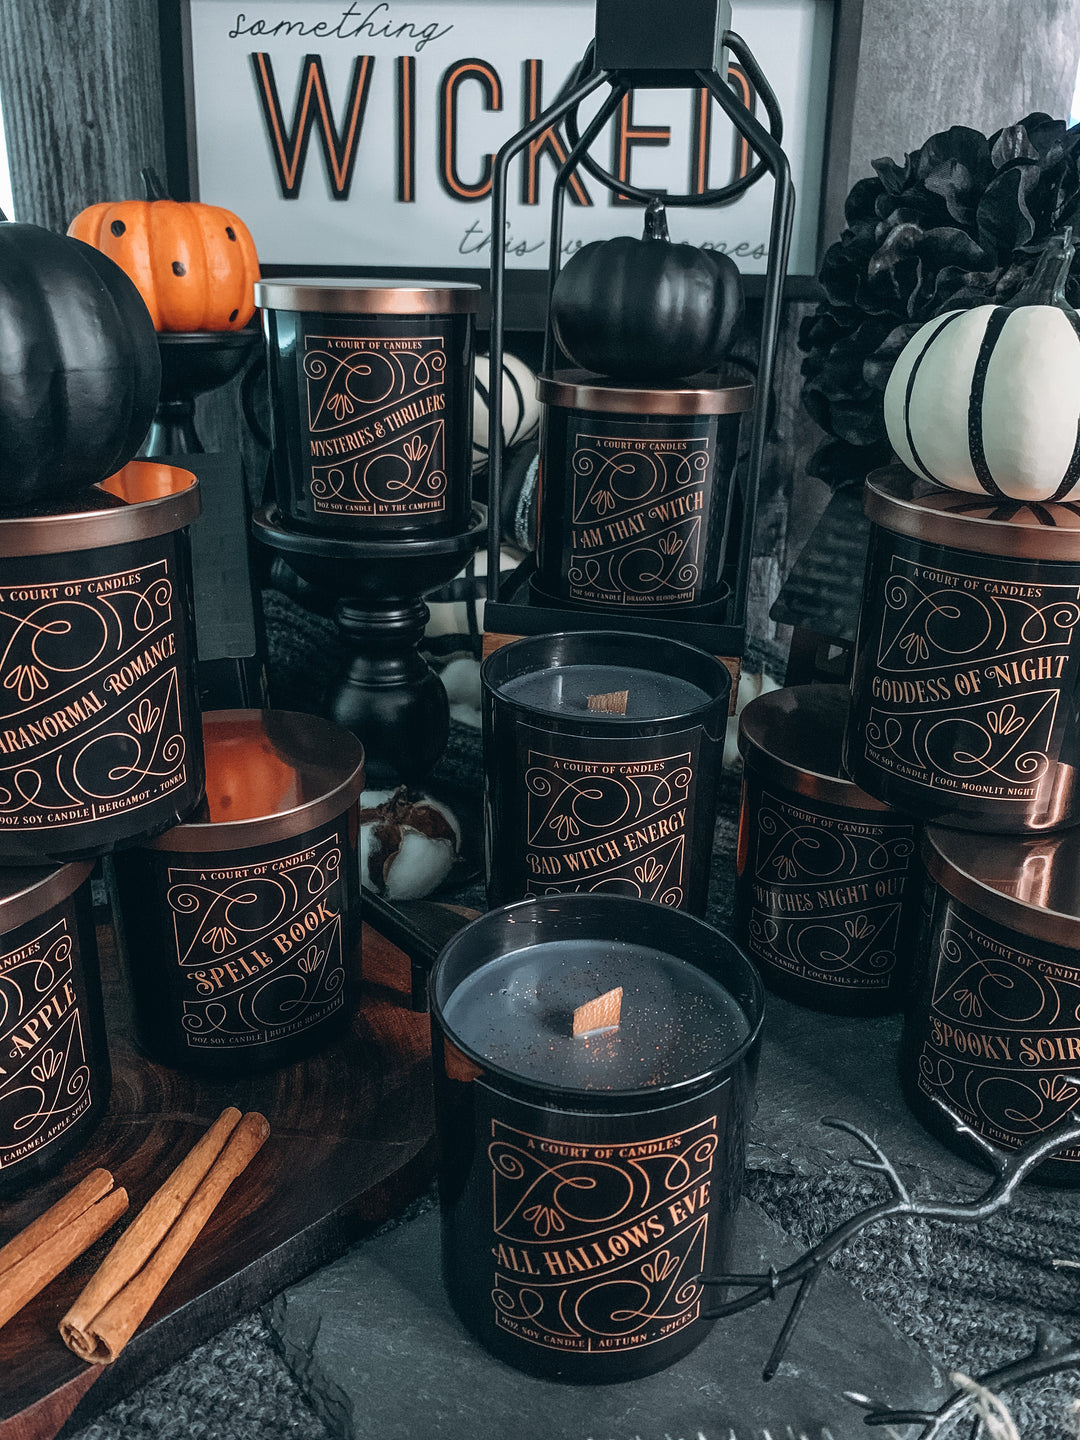 All Hallows' Eve - Halloween Luxe Collection